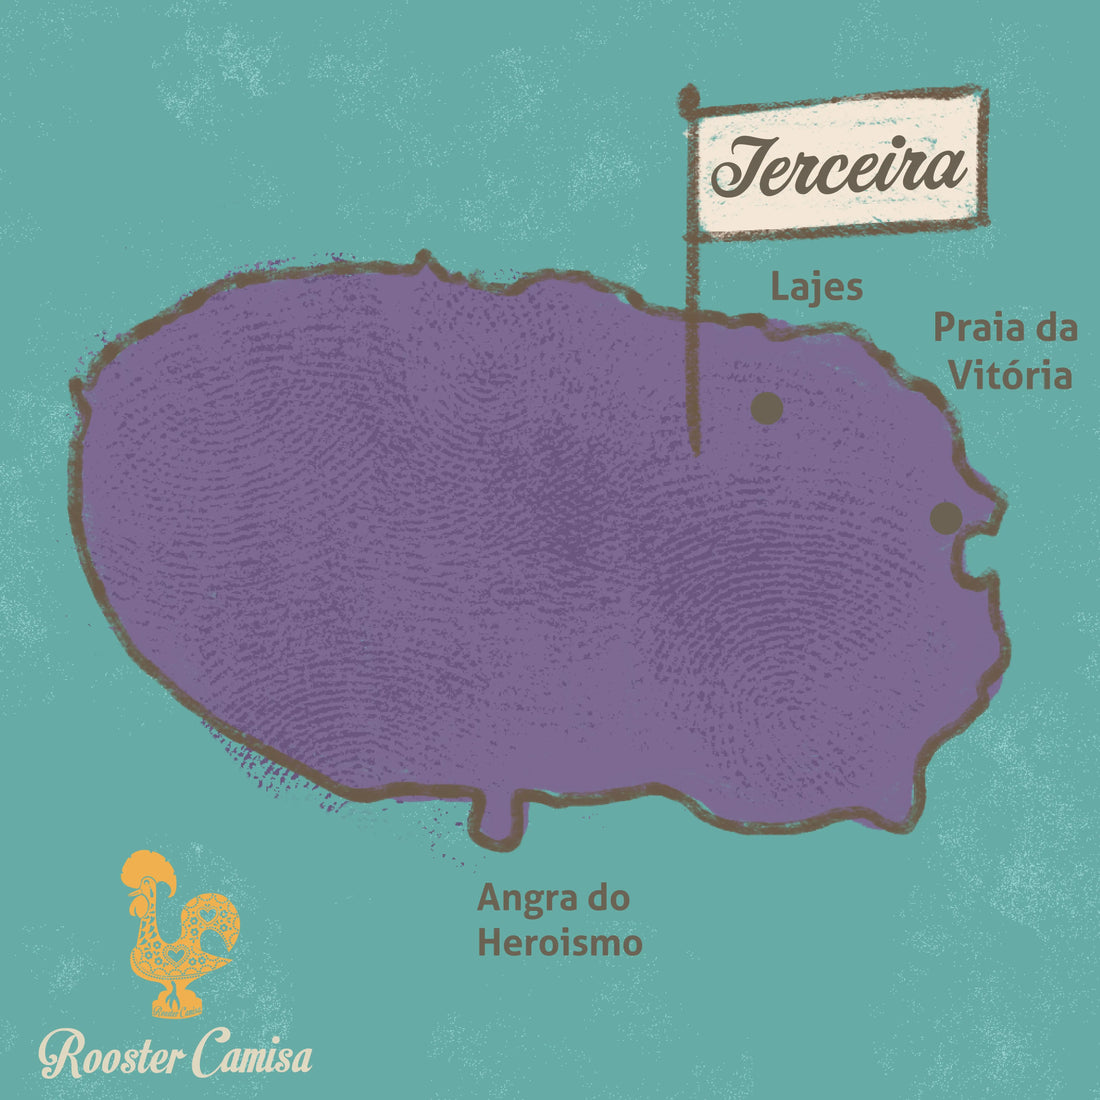 Visit the Acores-Terceira Rooster Camisa